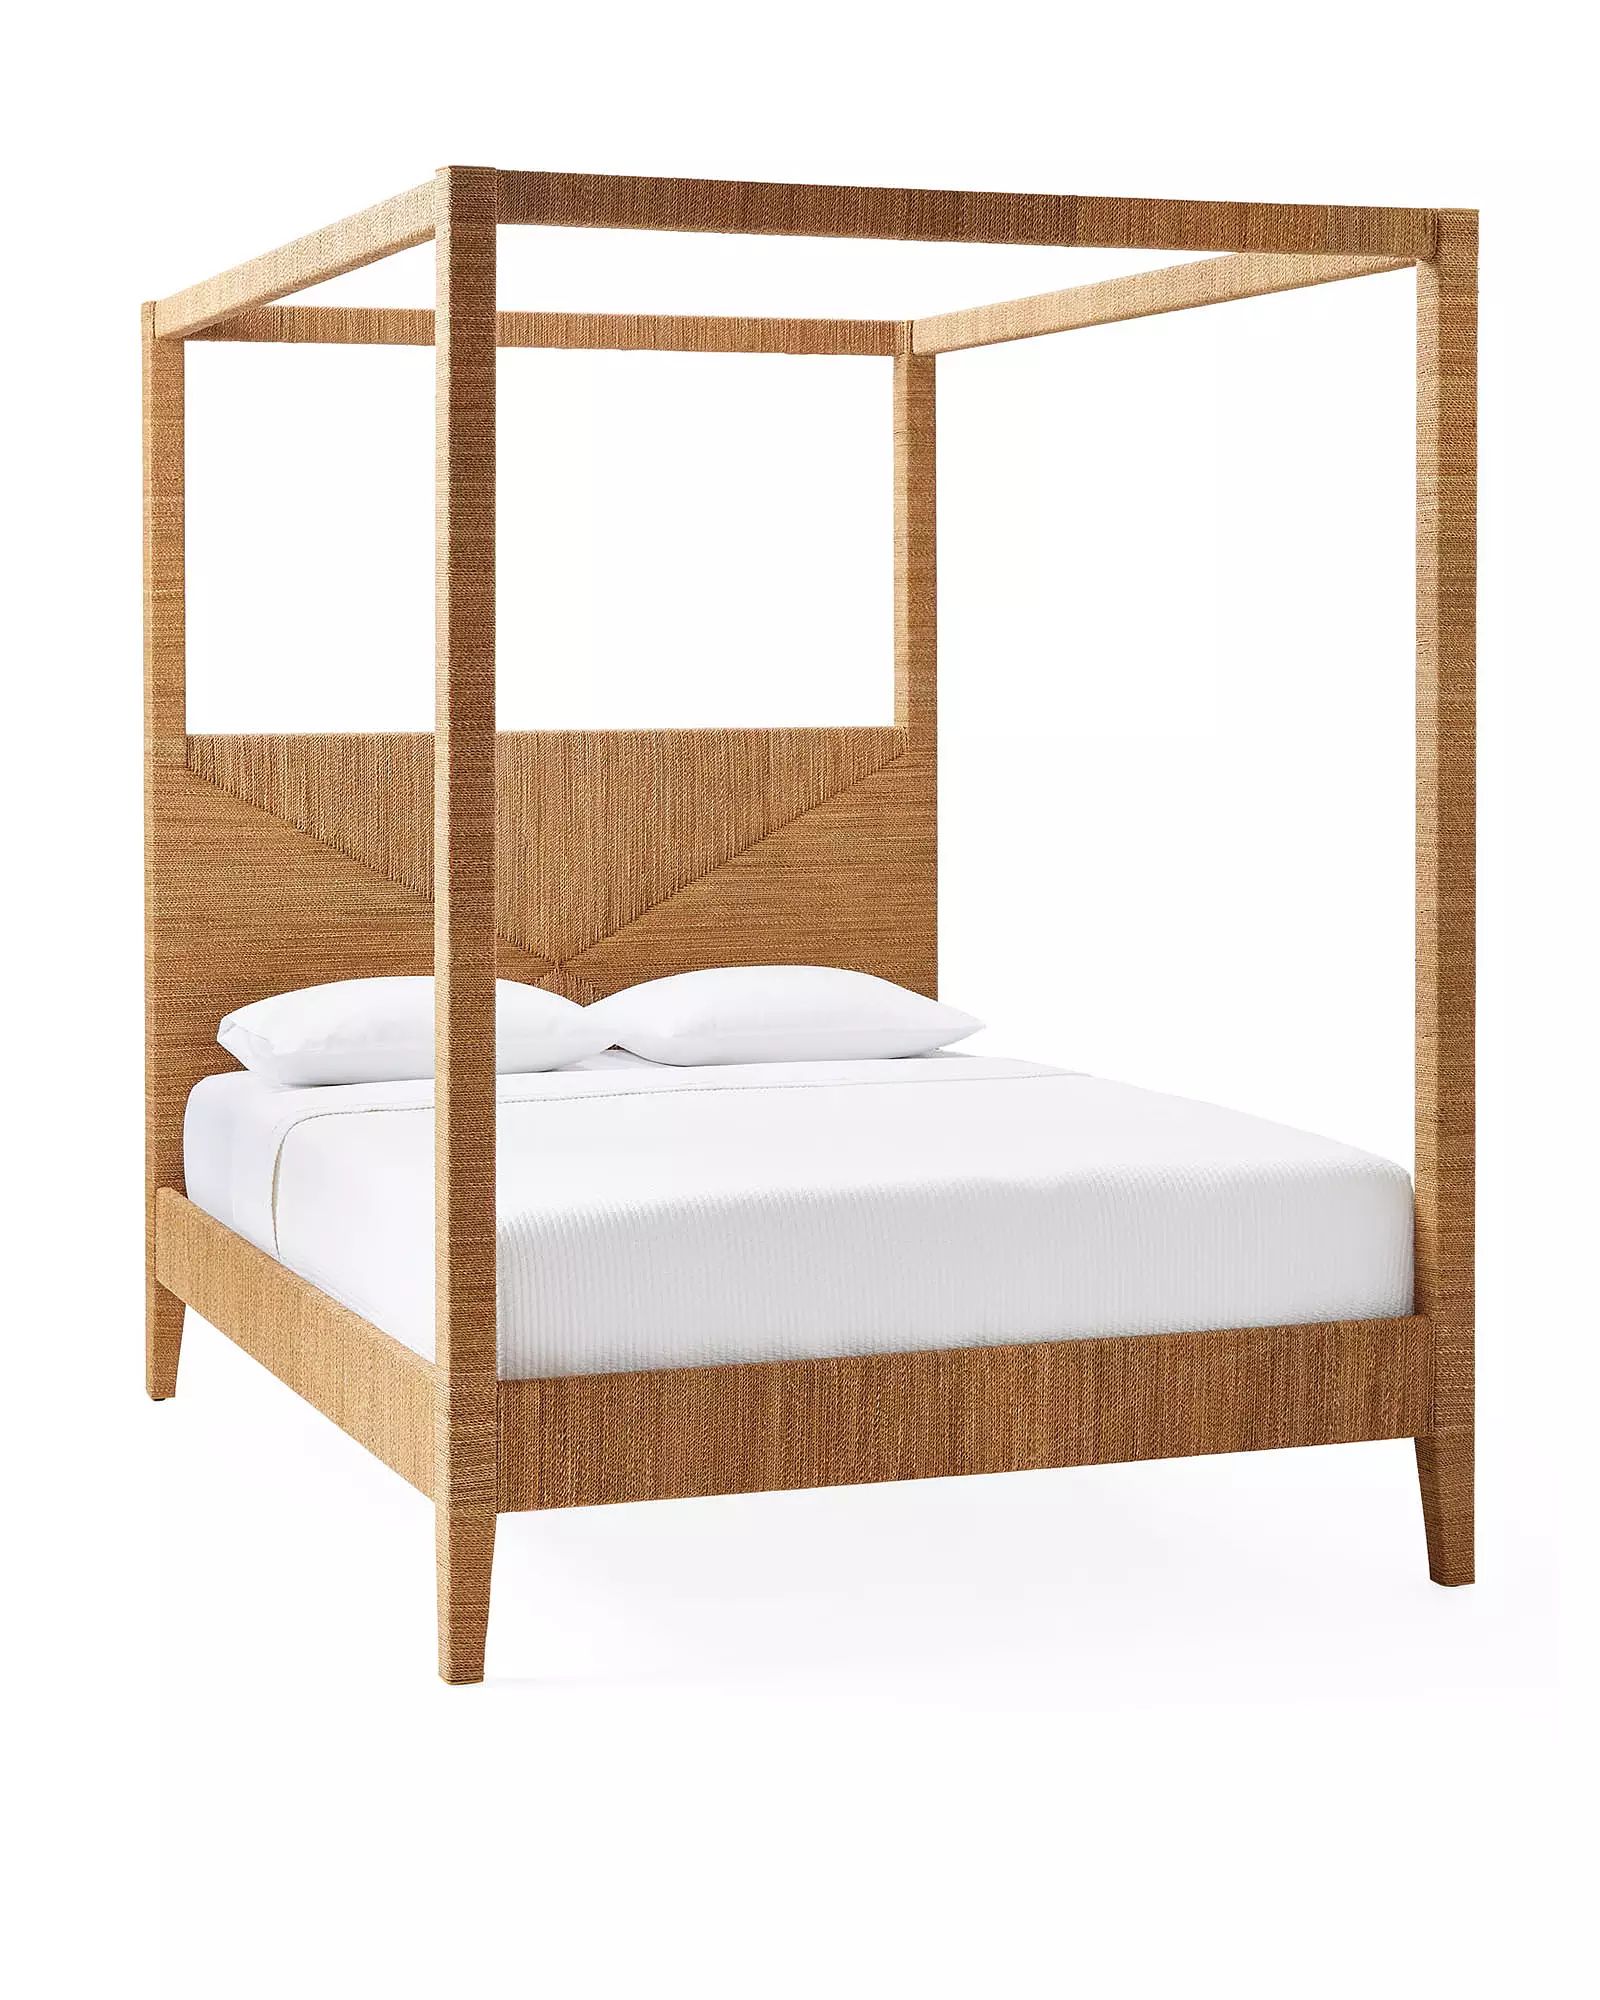 Hughes Four Poster Bed | Serena and Lily